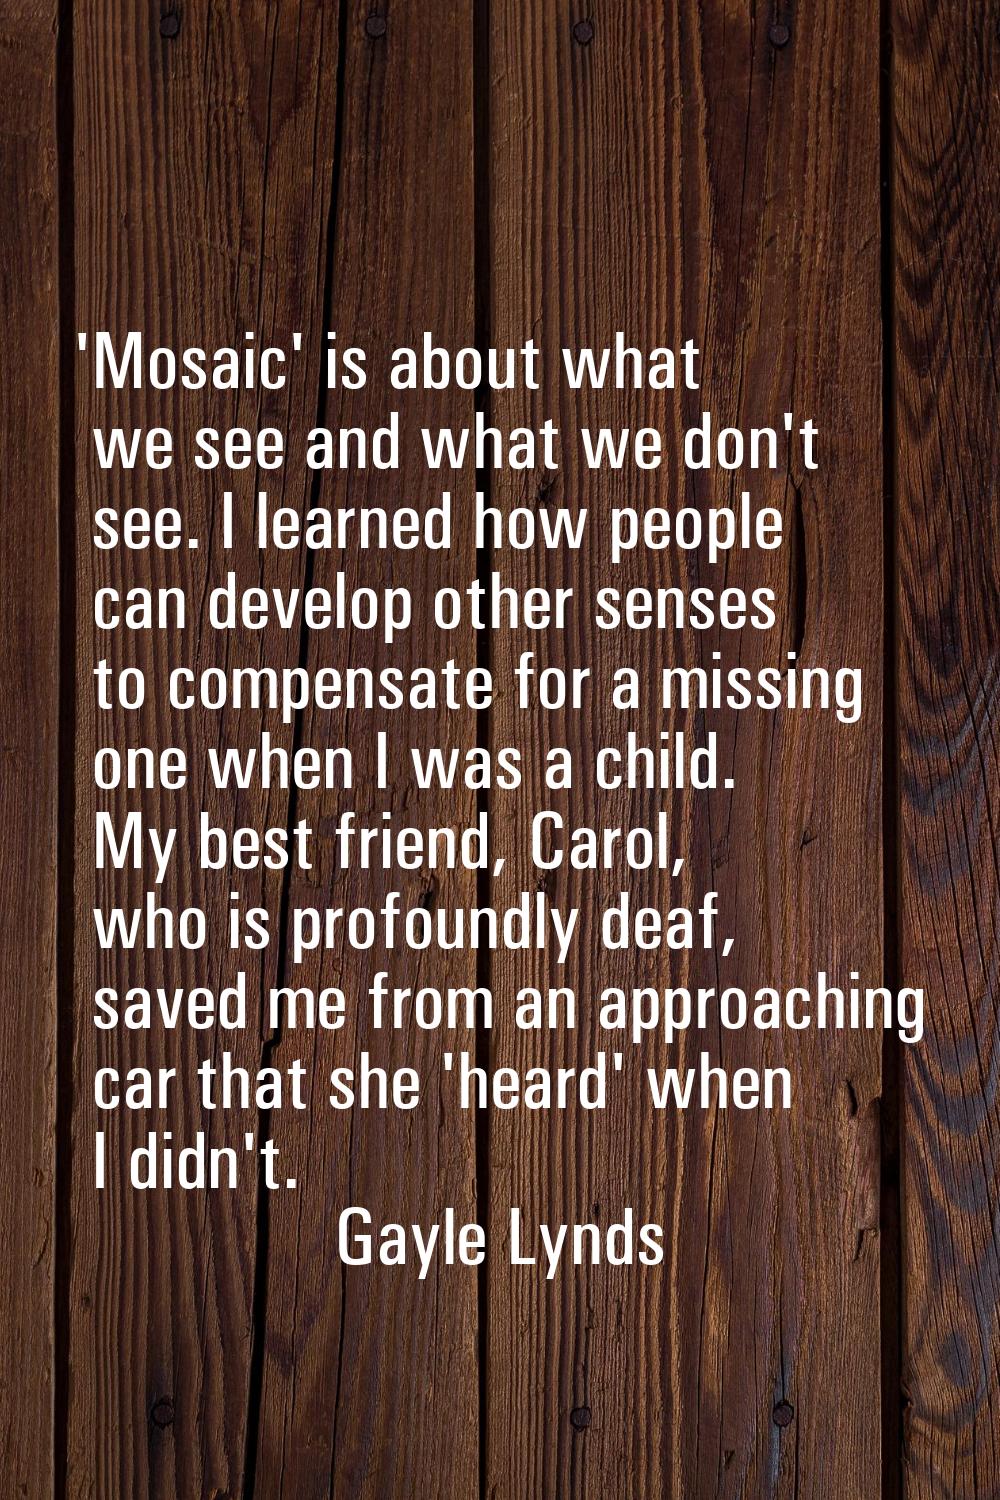 'Mosaic' is about what we see and what we don't see. I learned how people can develop other senses 